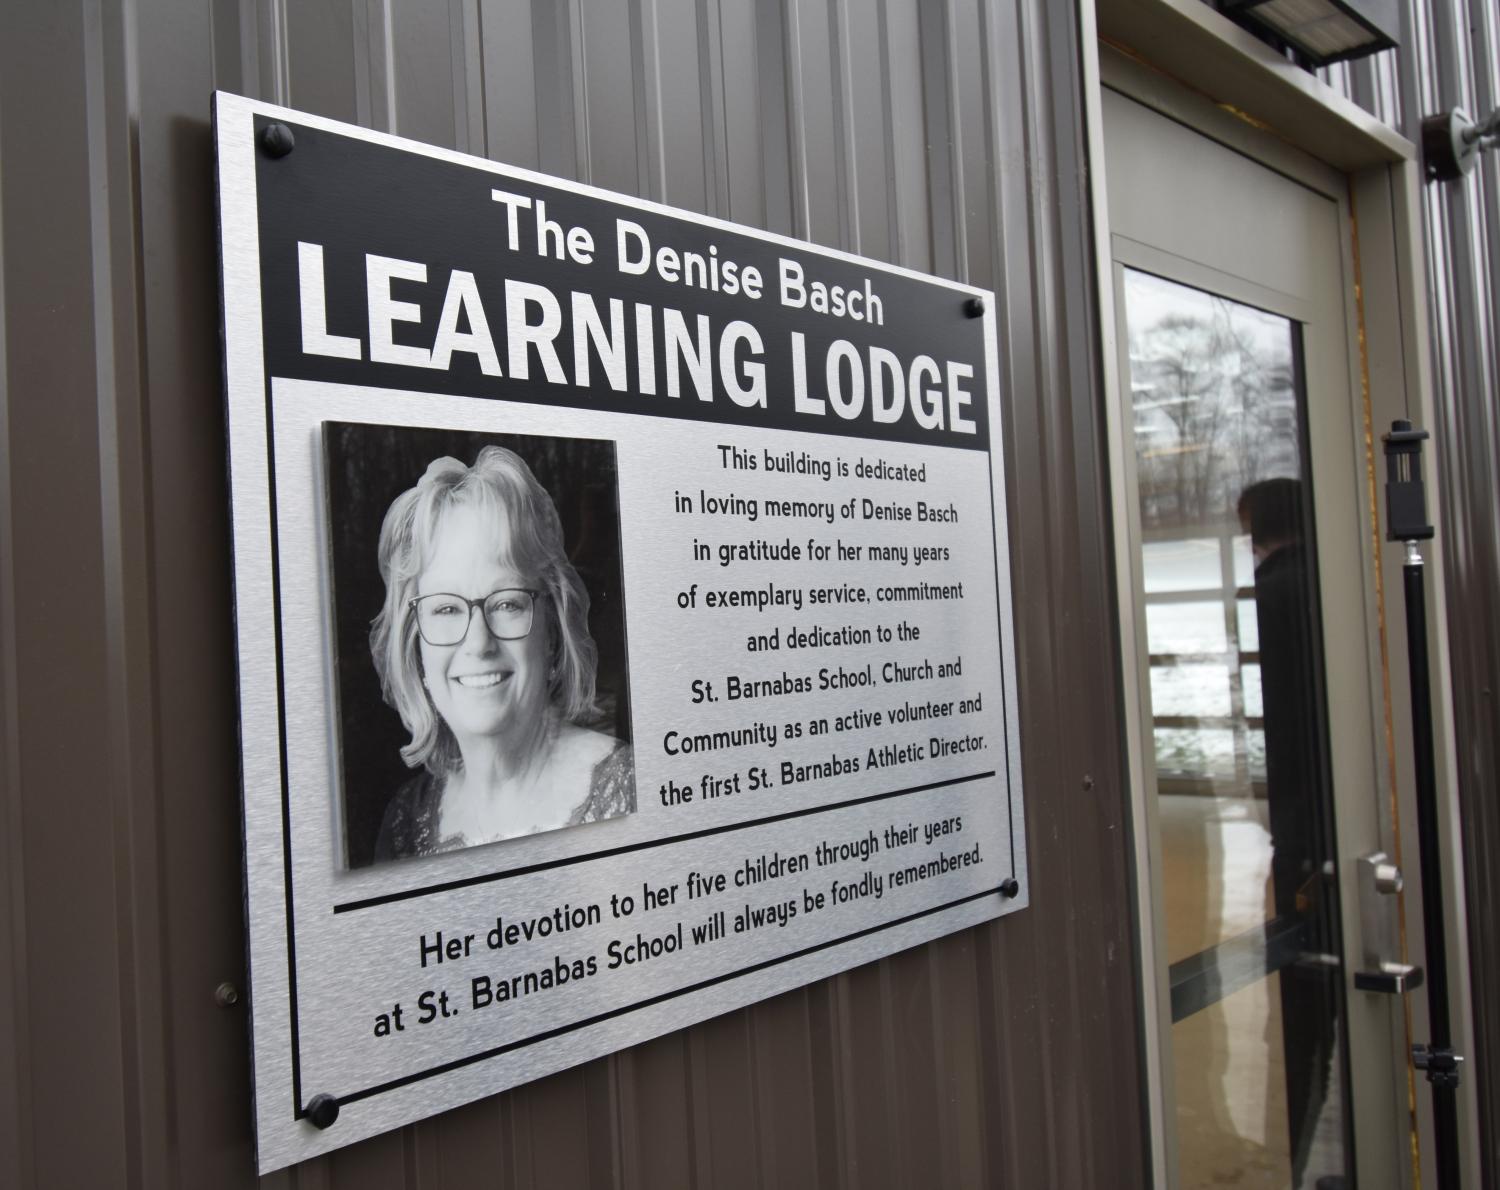 The Denise Basch Learning Lodge 